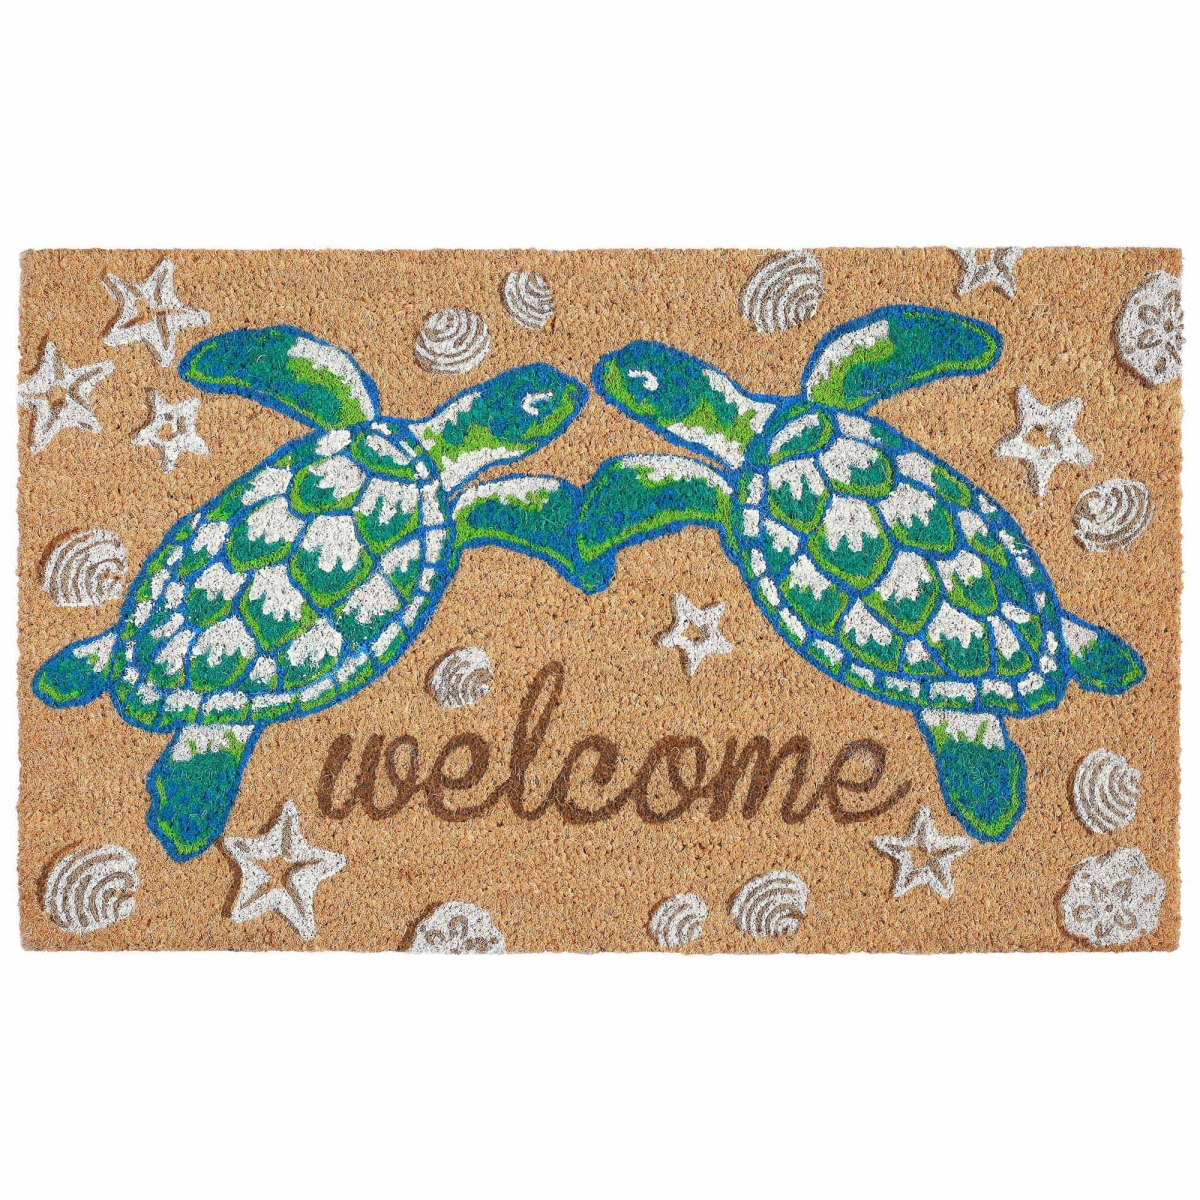 Ntr23205912 Liora Manne Natura Seaturtle Welcome Outdoor Mat, Natural - 24 X 36 In.